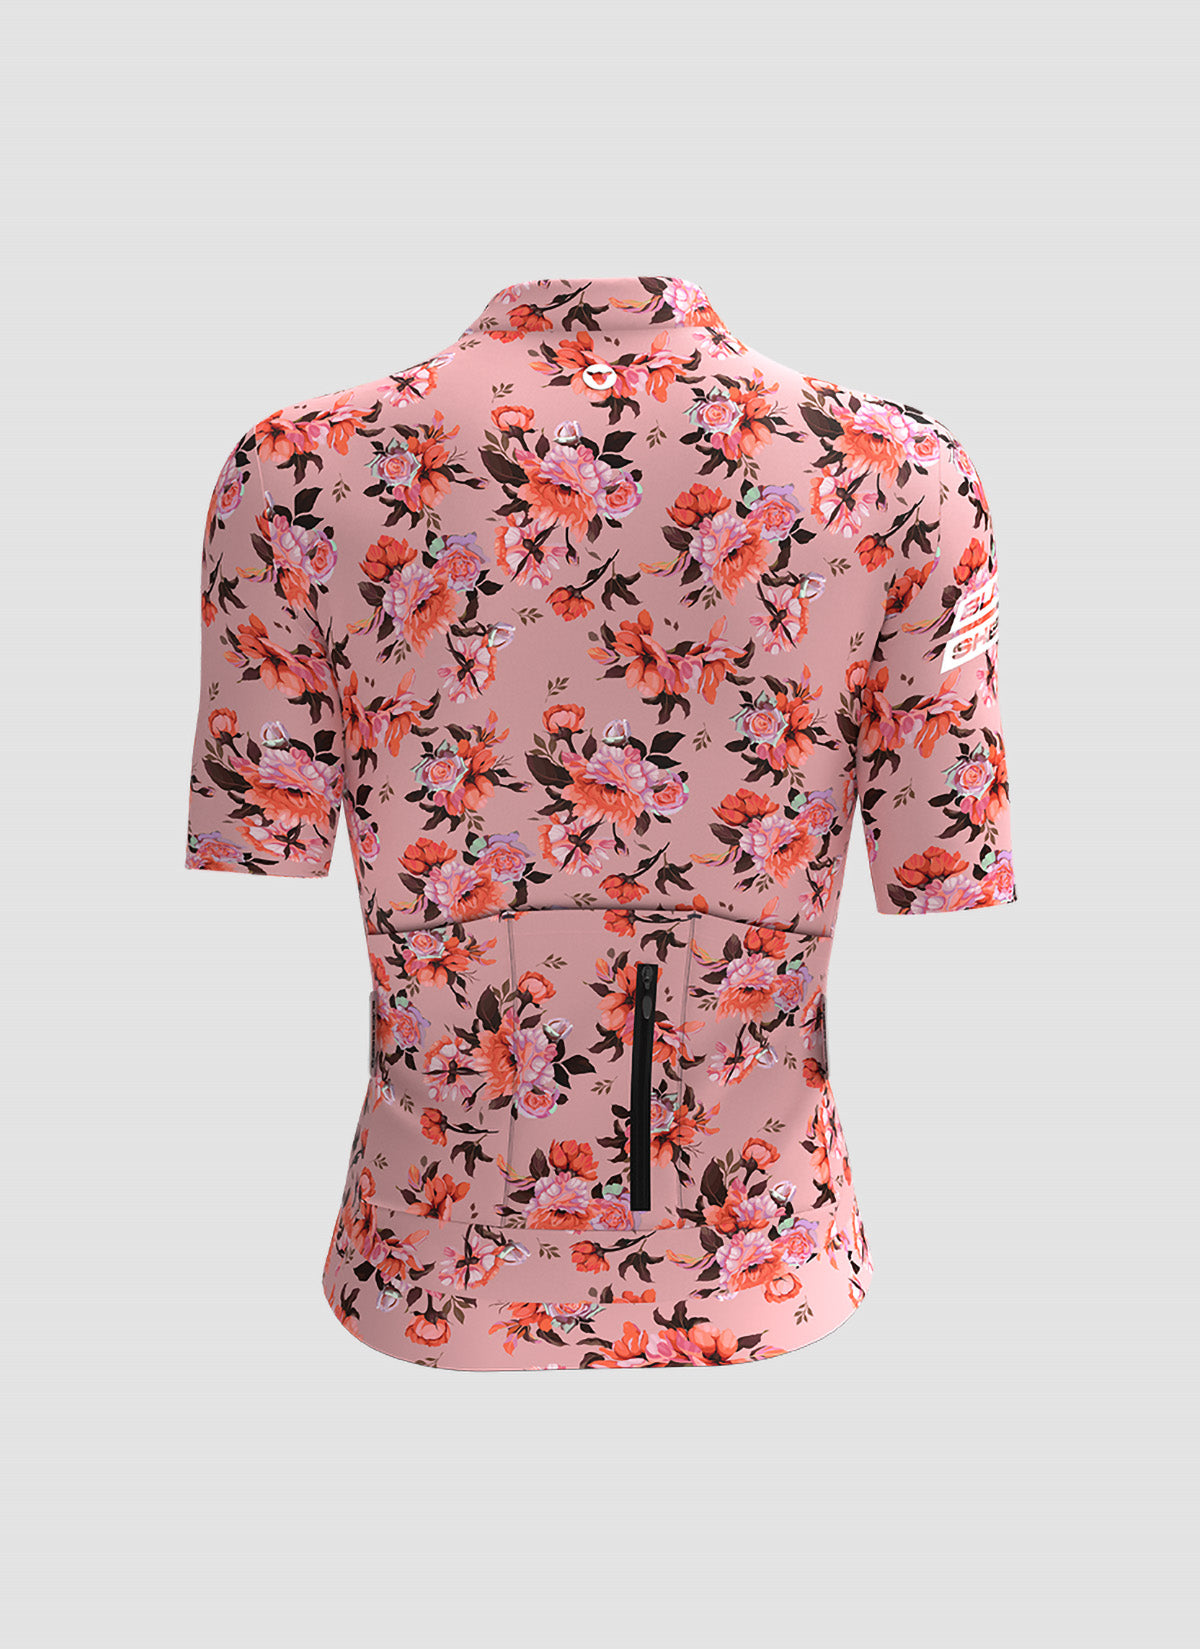 Women's WMN Integrated Jersey - Canyon Florals